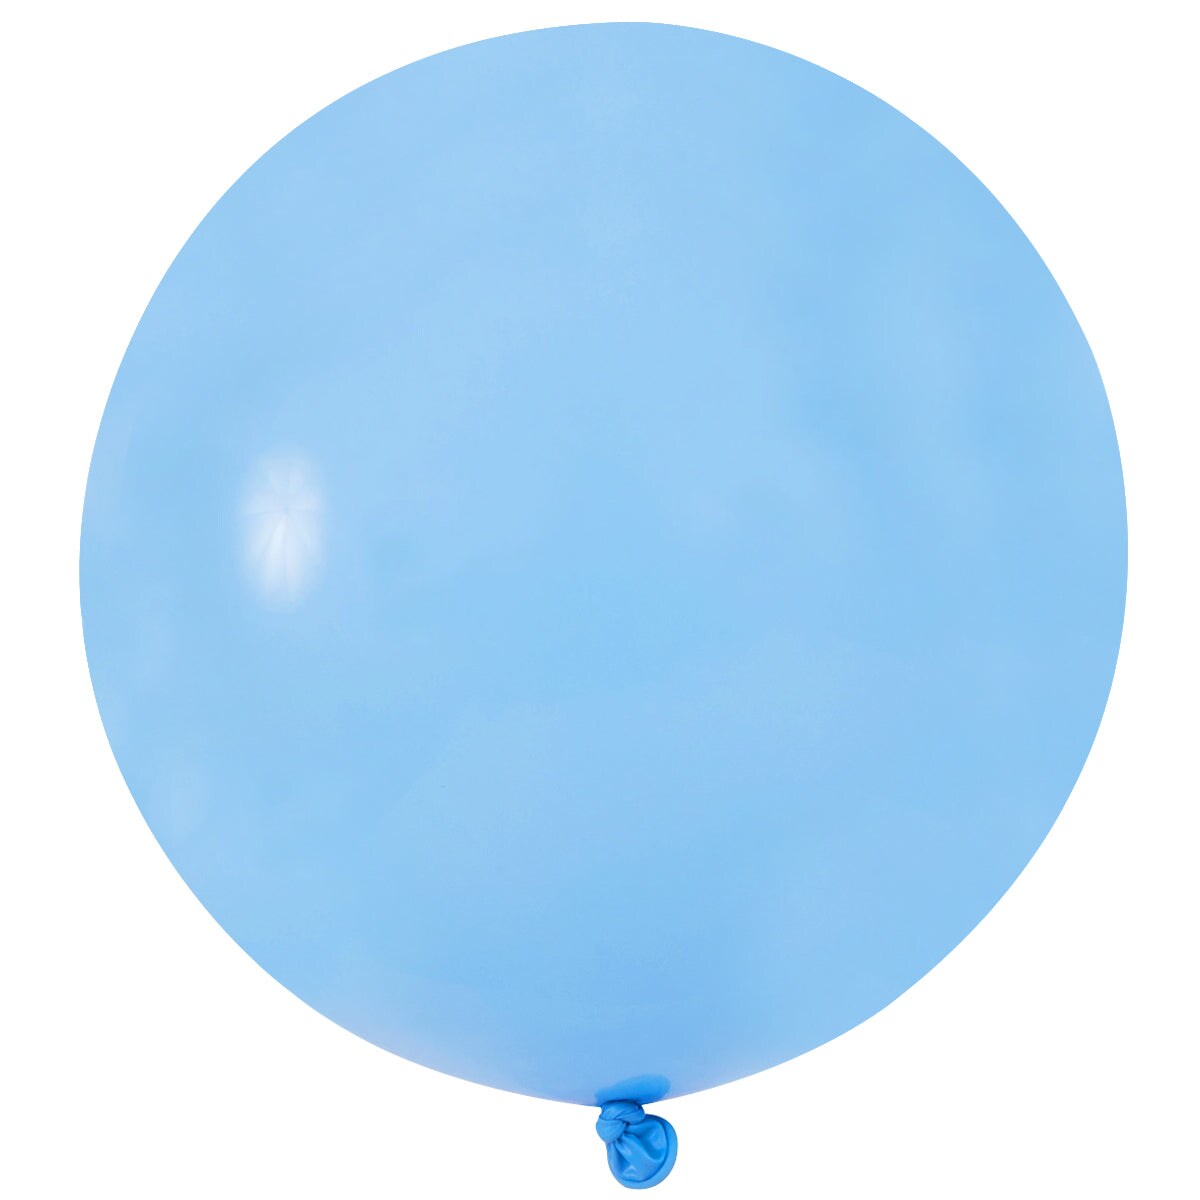 Wrapables 18 Inch Latex Balloons (10 Pack), Sky Blue